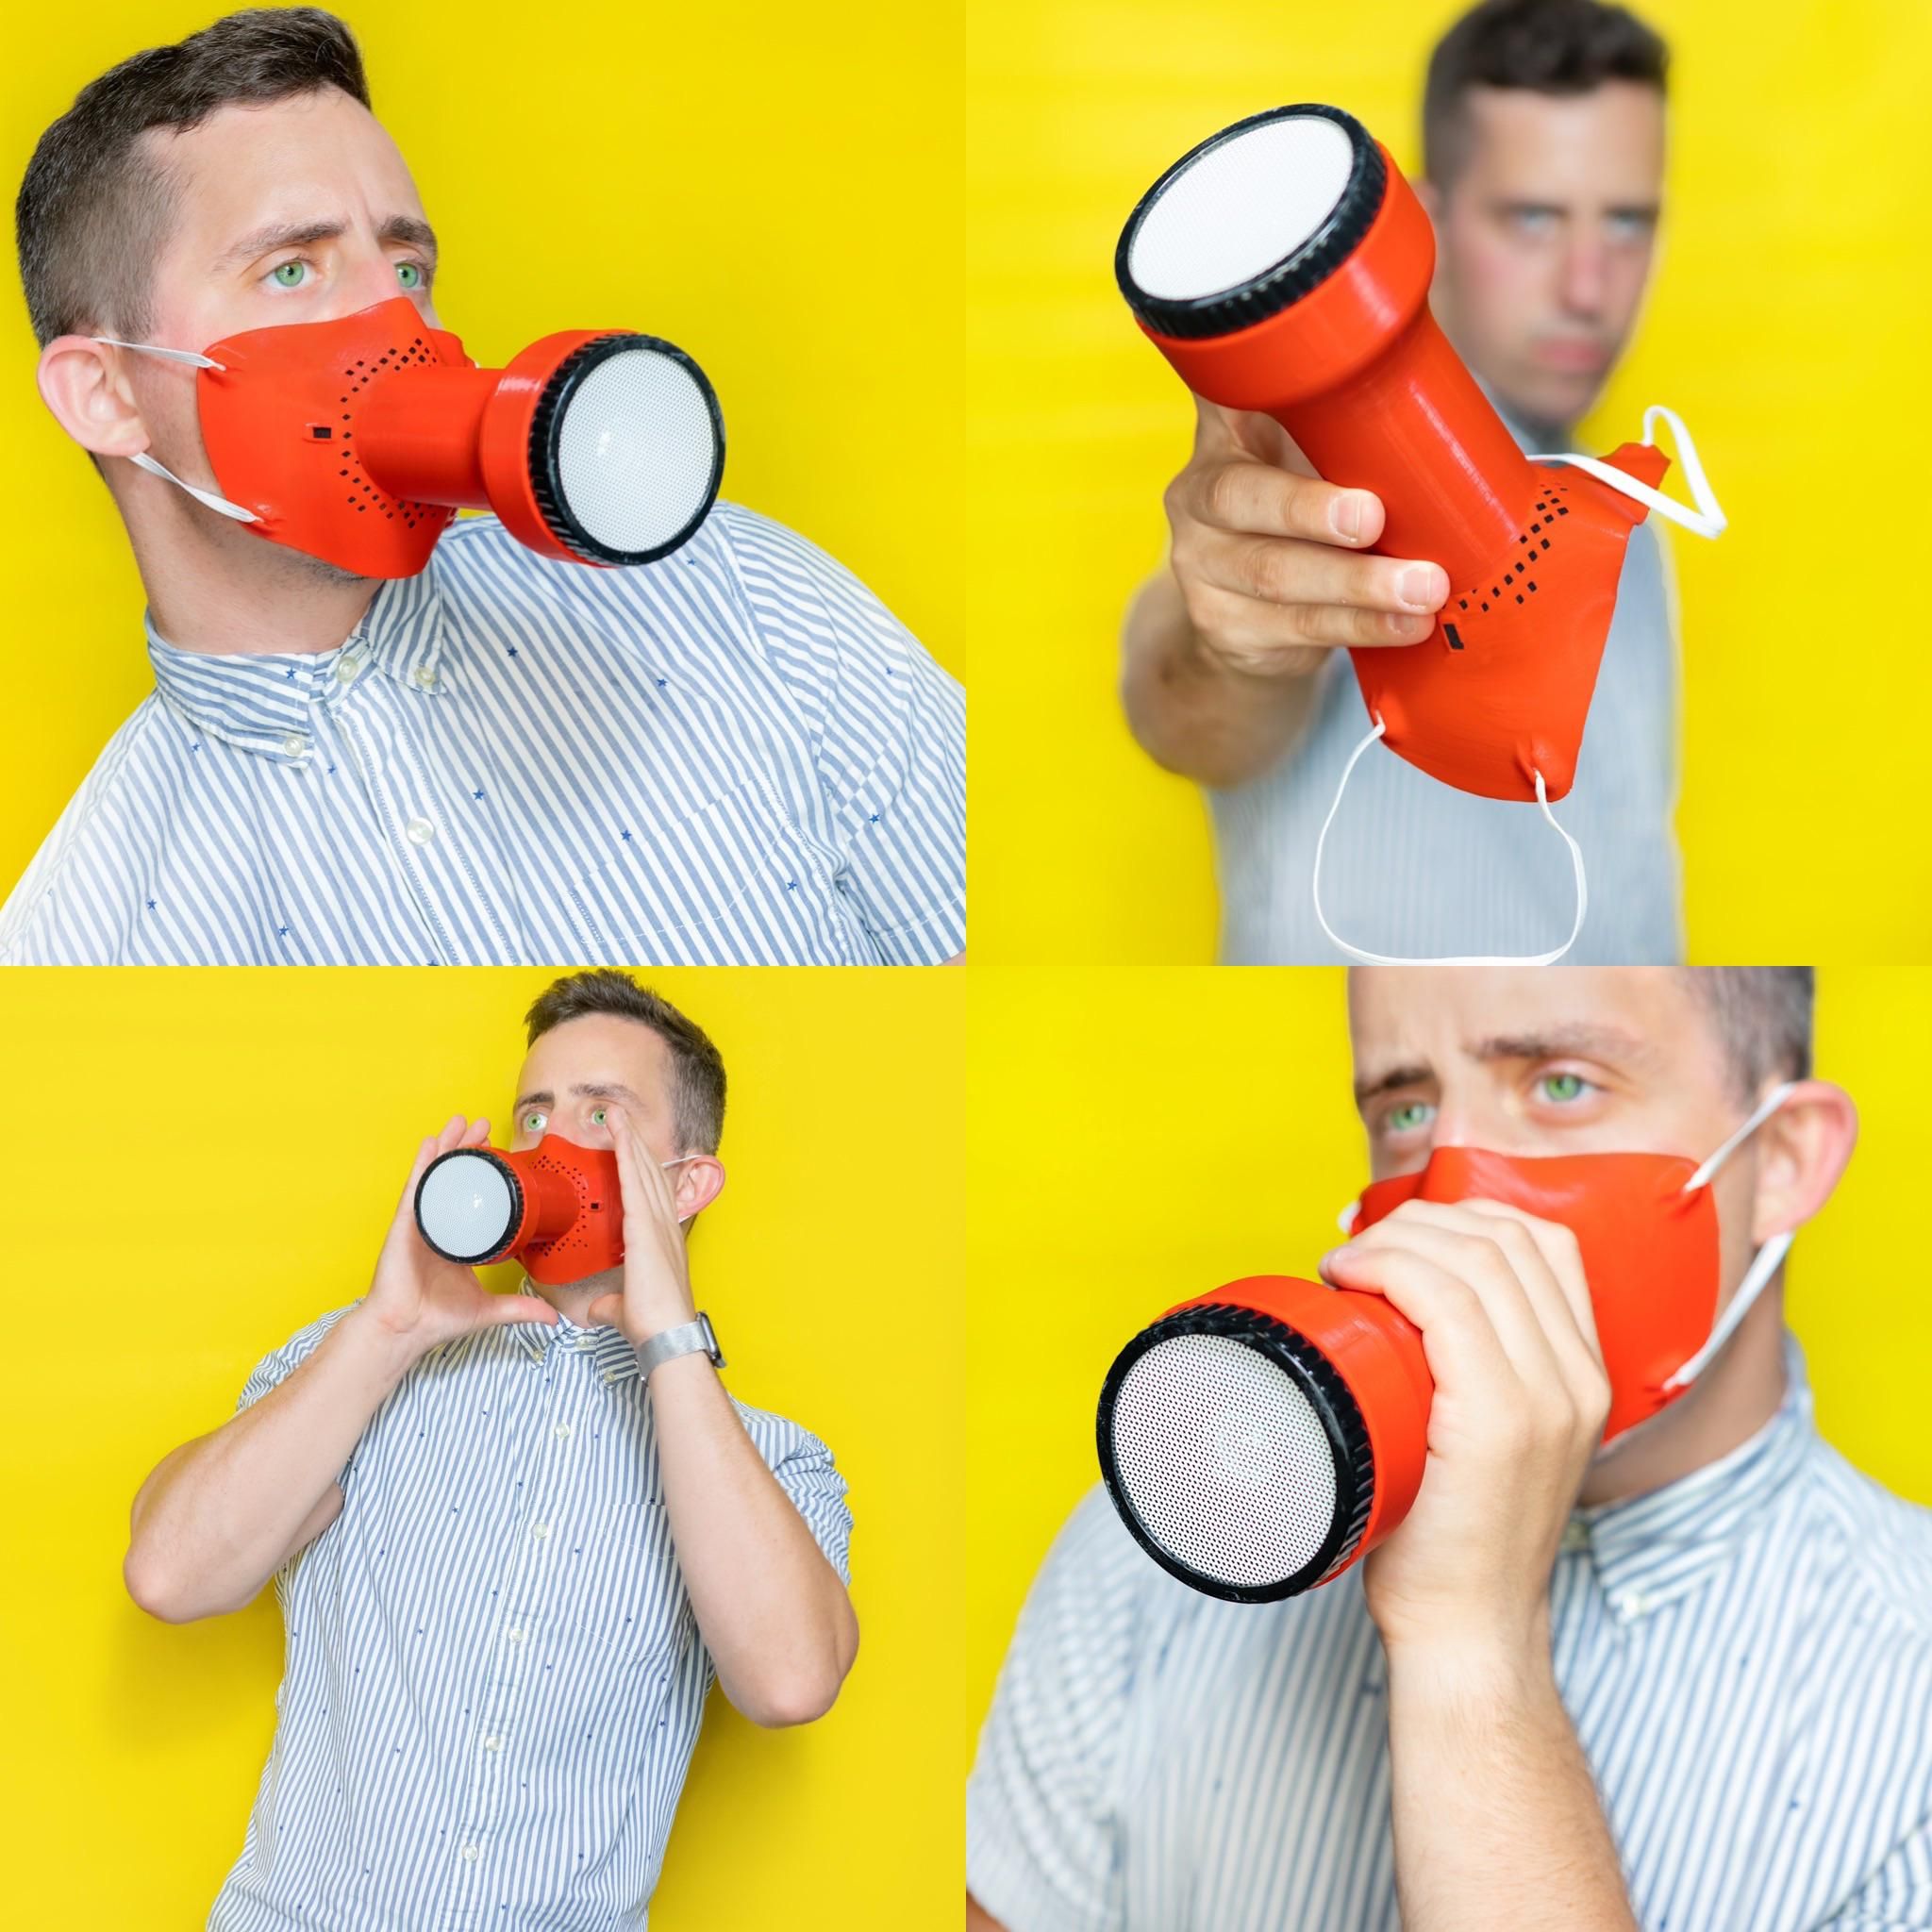 I like to build fake products so I created a face mask with a built in megaphone.